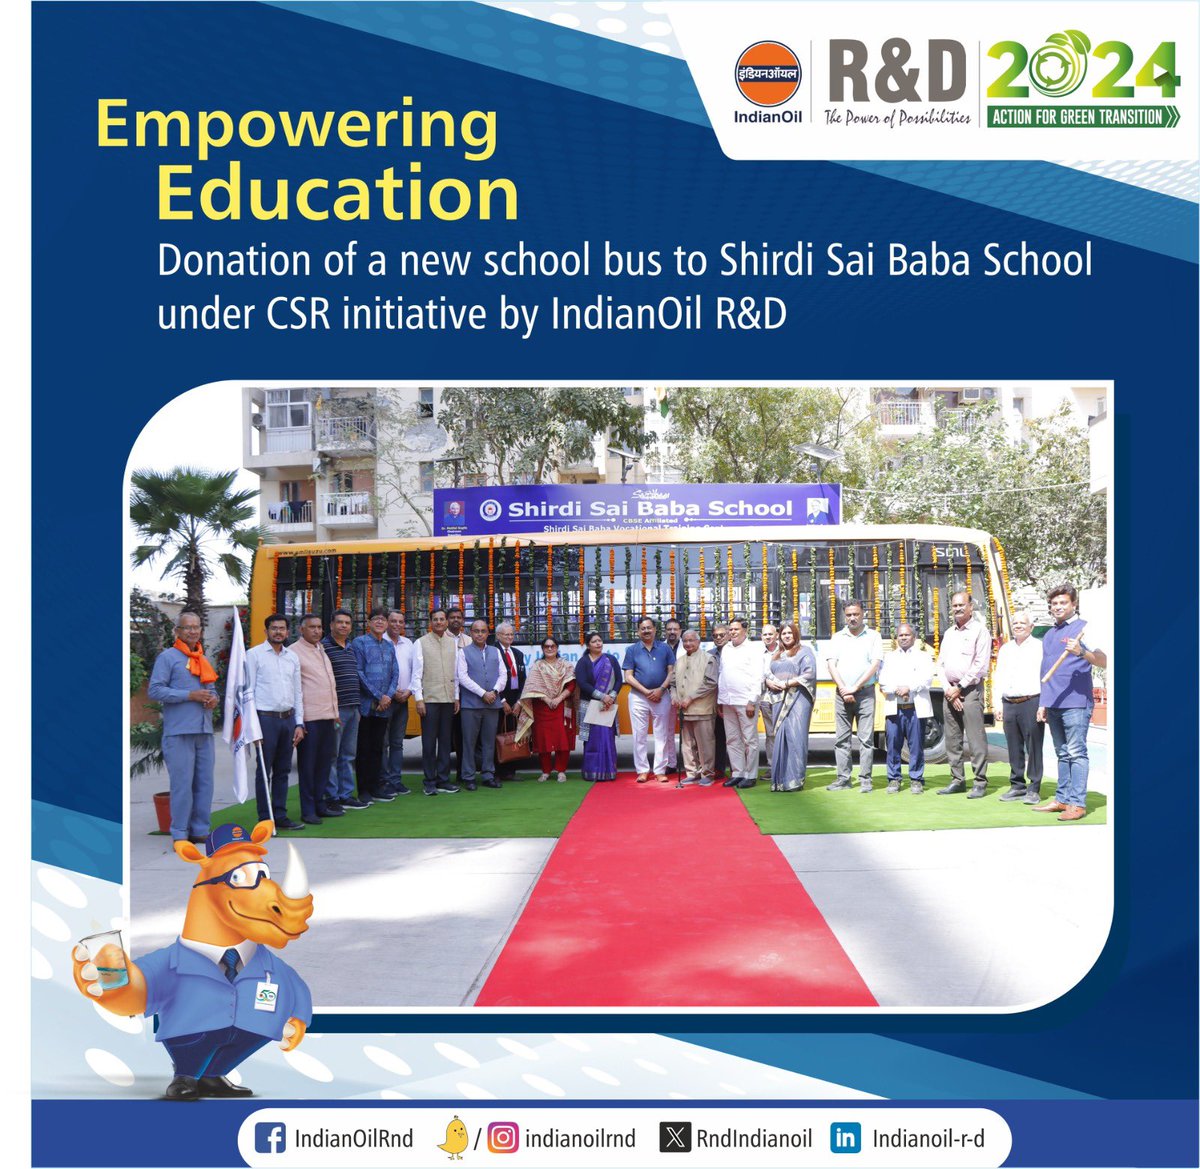 1/3 IndianOil proudly donates a school bus to Shirdi Sai Baba School, Faridabad, under its CSR activity, ensuring smoother journeys for over 300 underprivileged students.